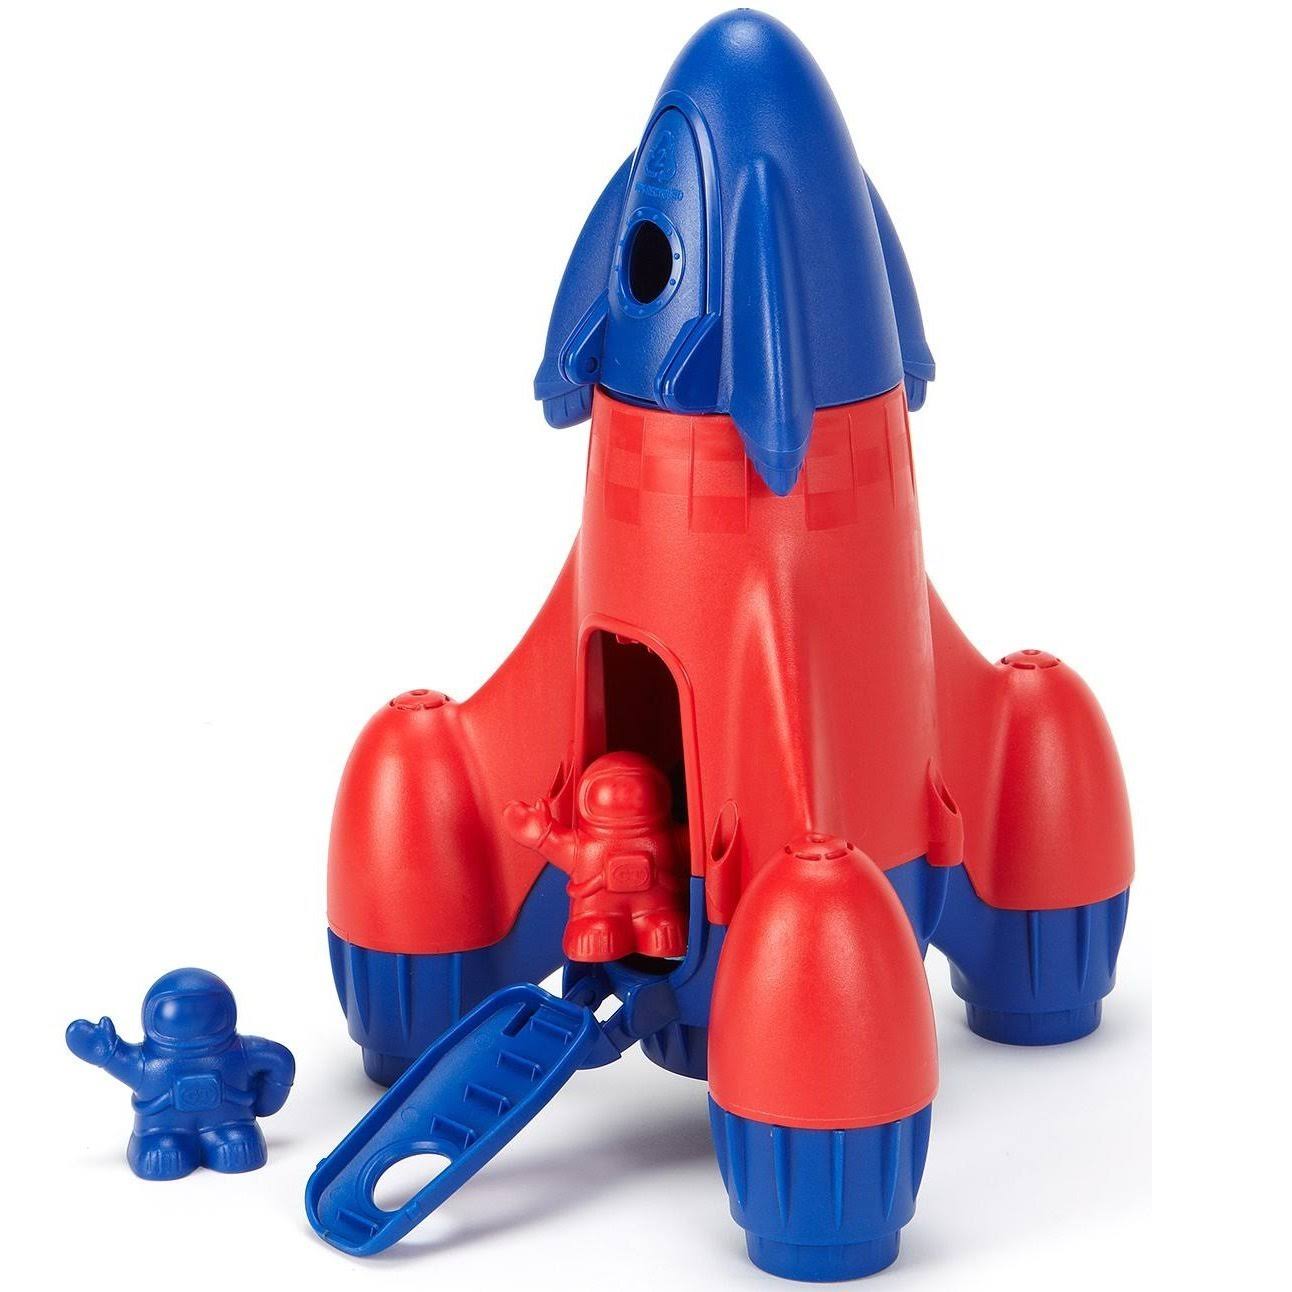 Green Toys Rocket Toy - Blue and Red